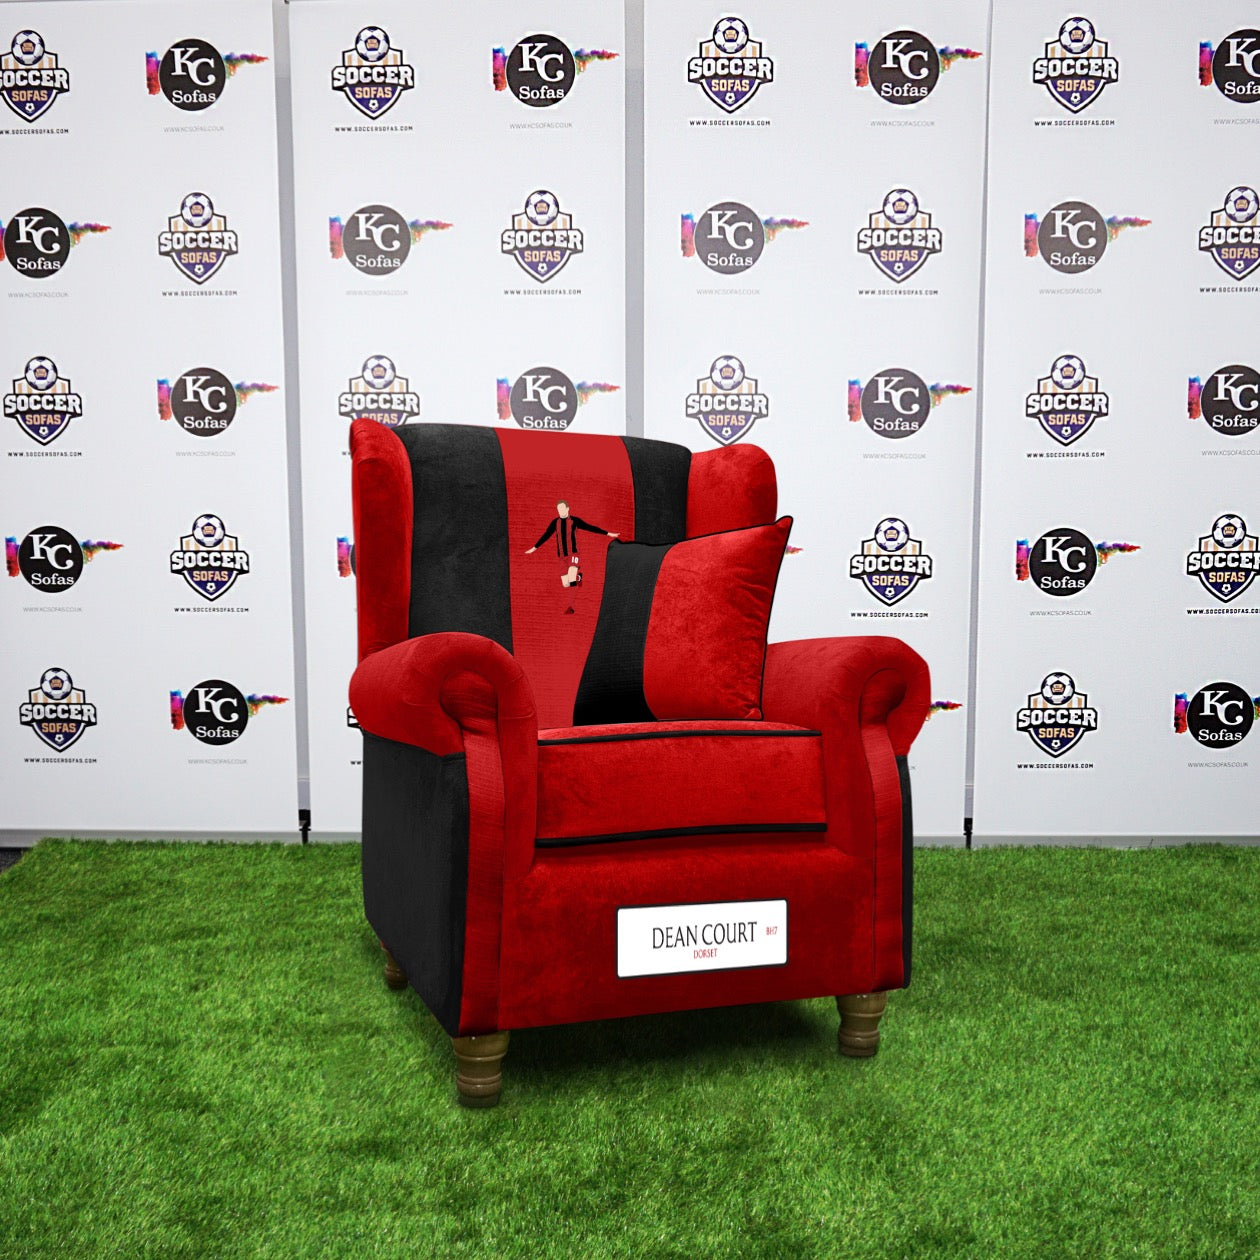 Dean Court Wing Chair (AFC Bournemouth)